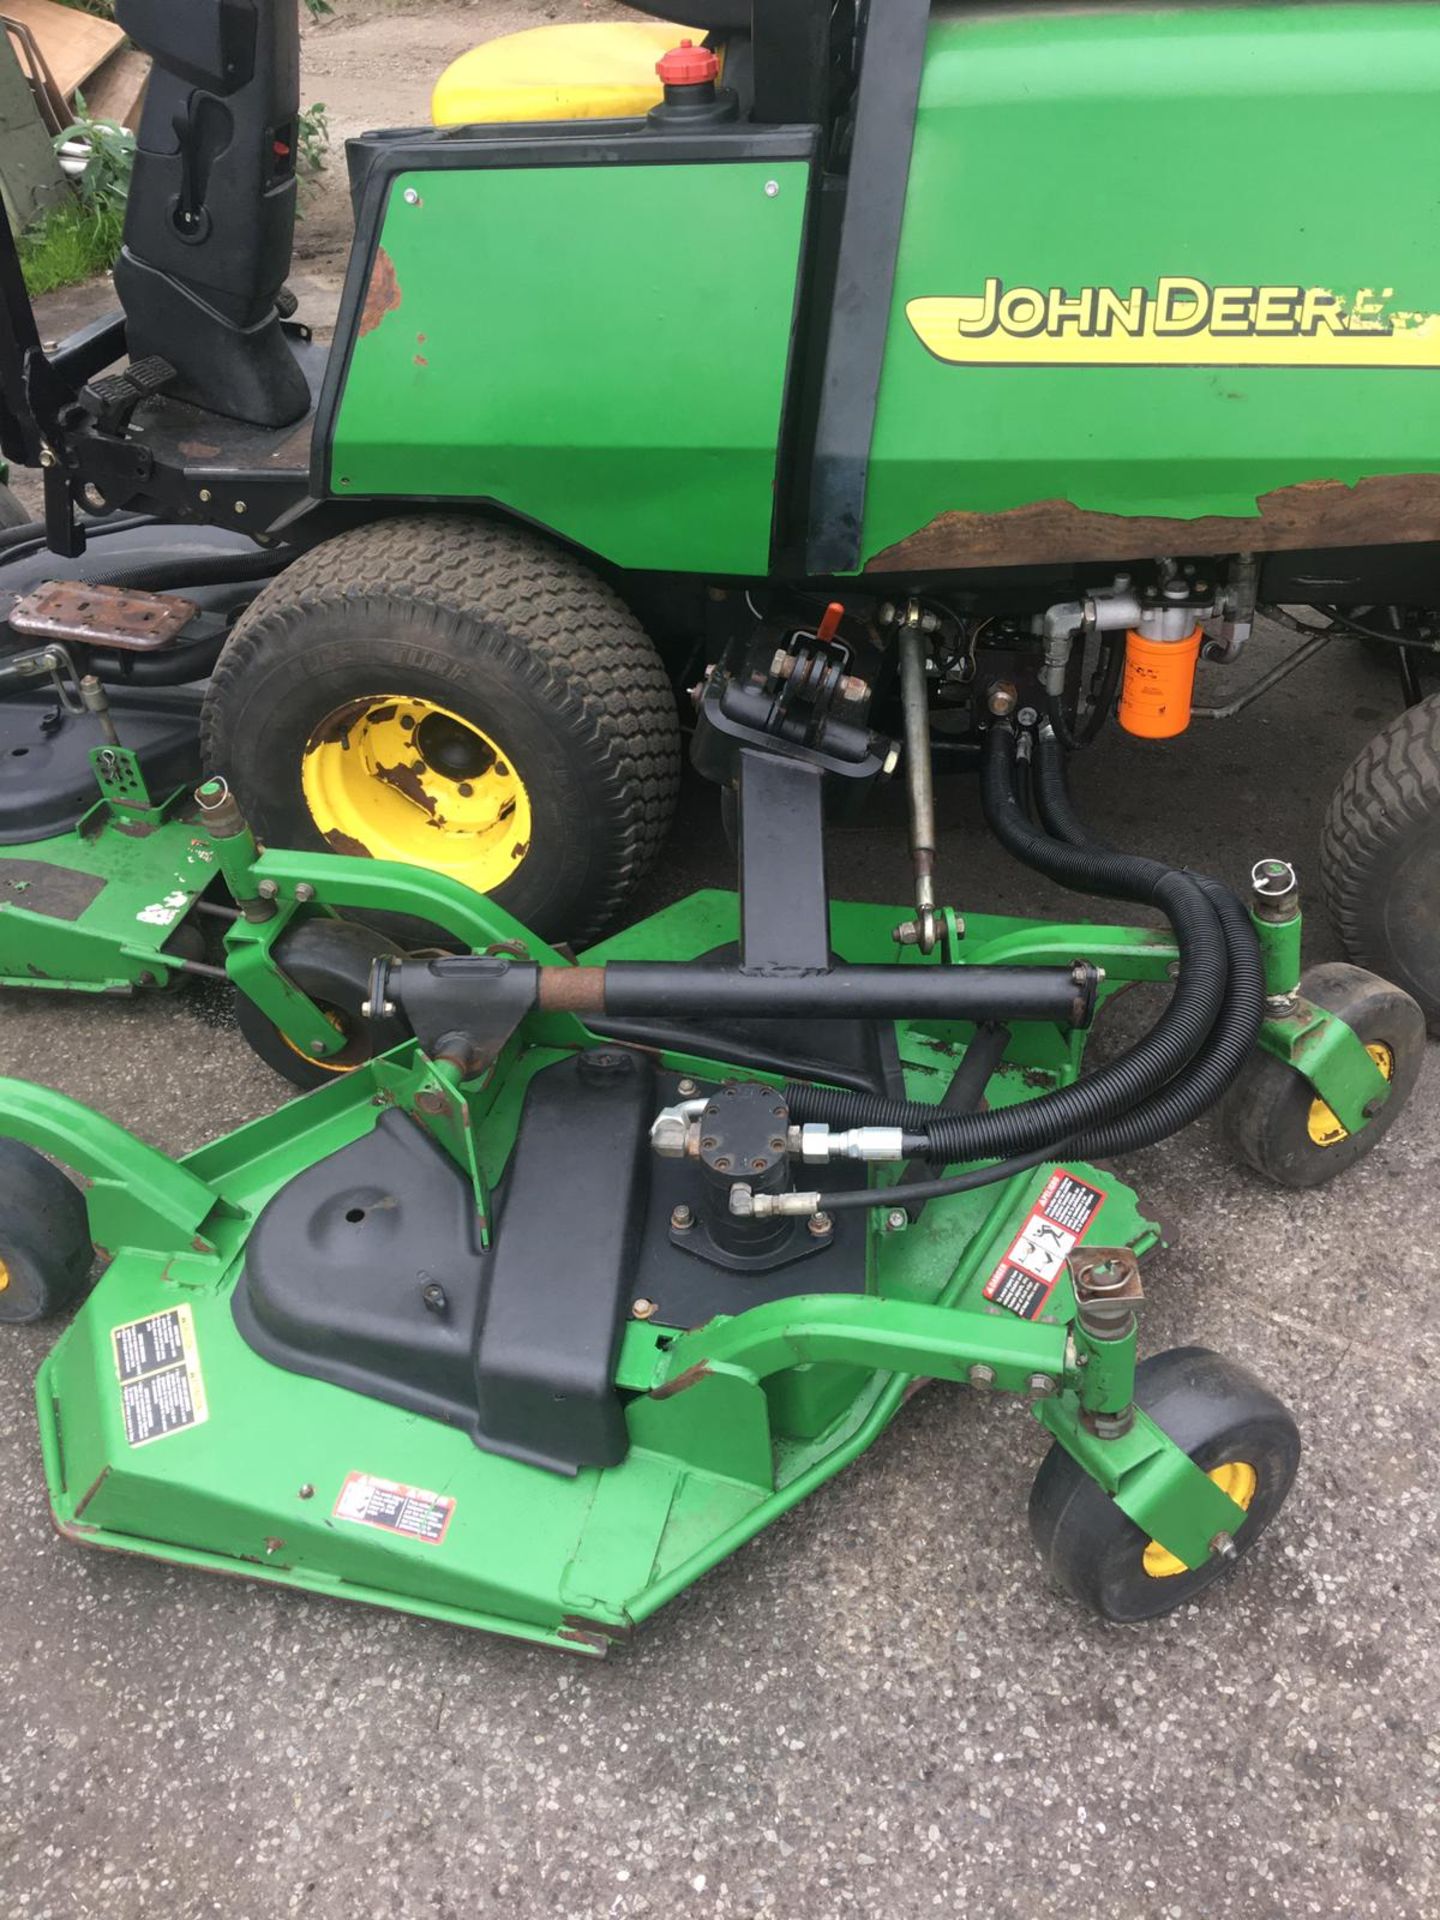 JOHN DEERE 1600 WIDE AREA TURBO BATWING RIDE ON LAWN MOWER, CRUISE CONTROL, RUNS & WORKS *NO VAT* - Image 8 of 24